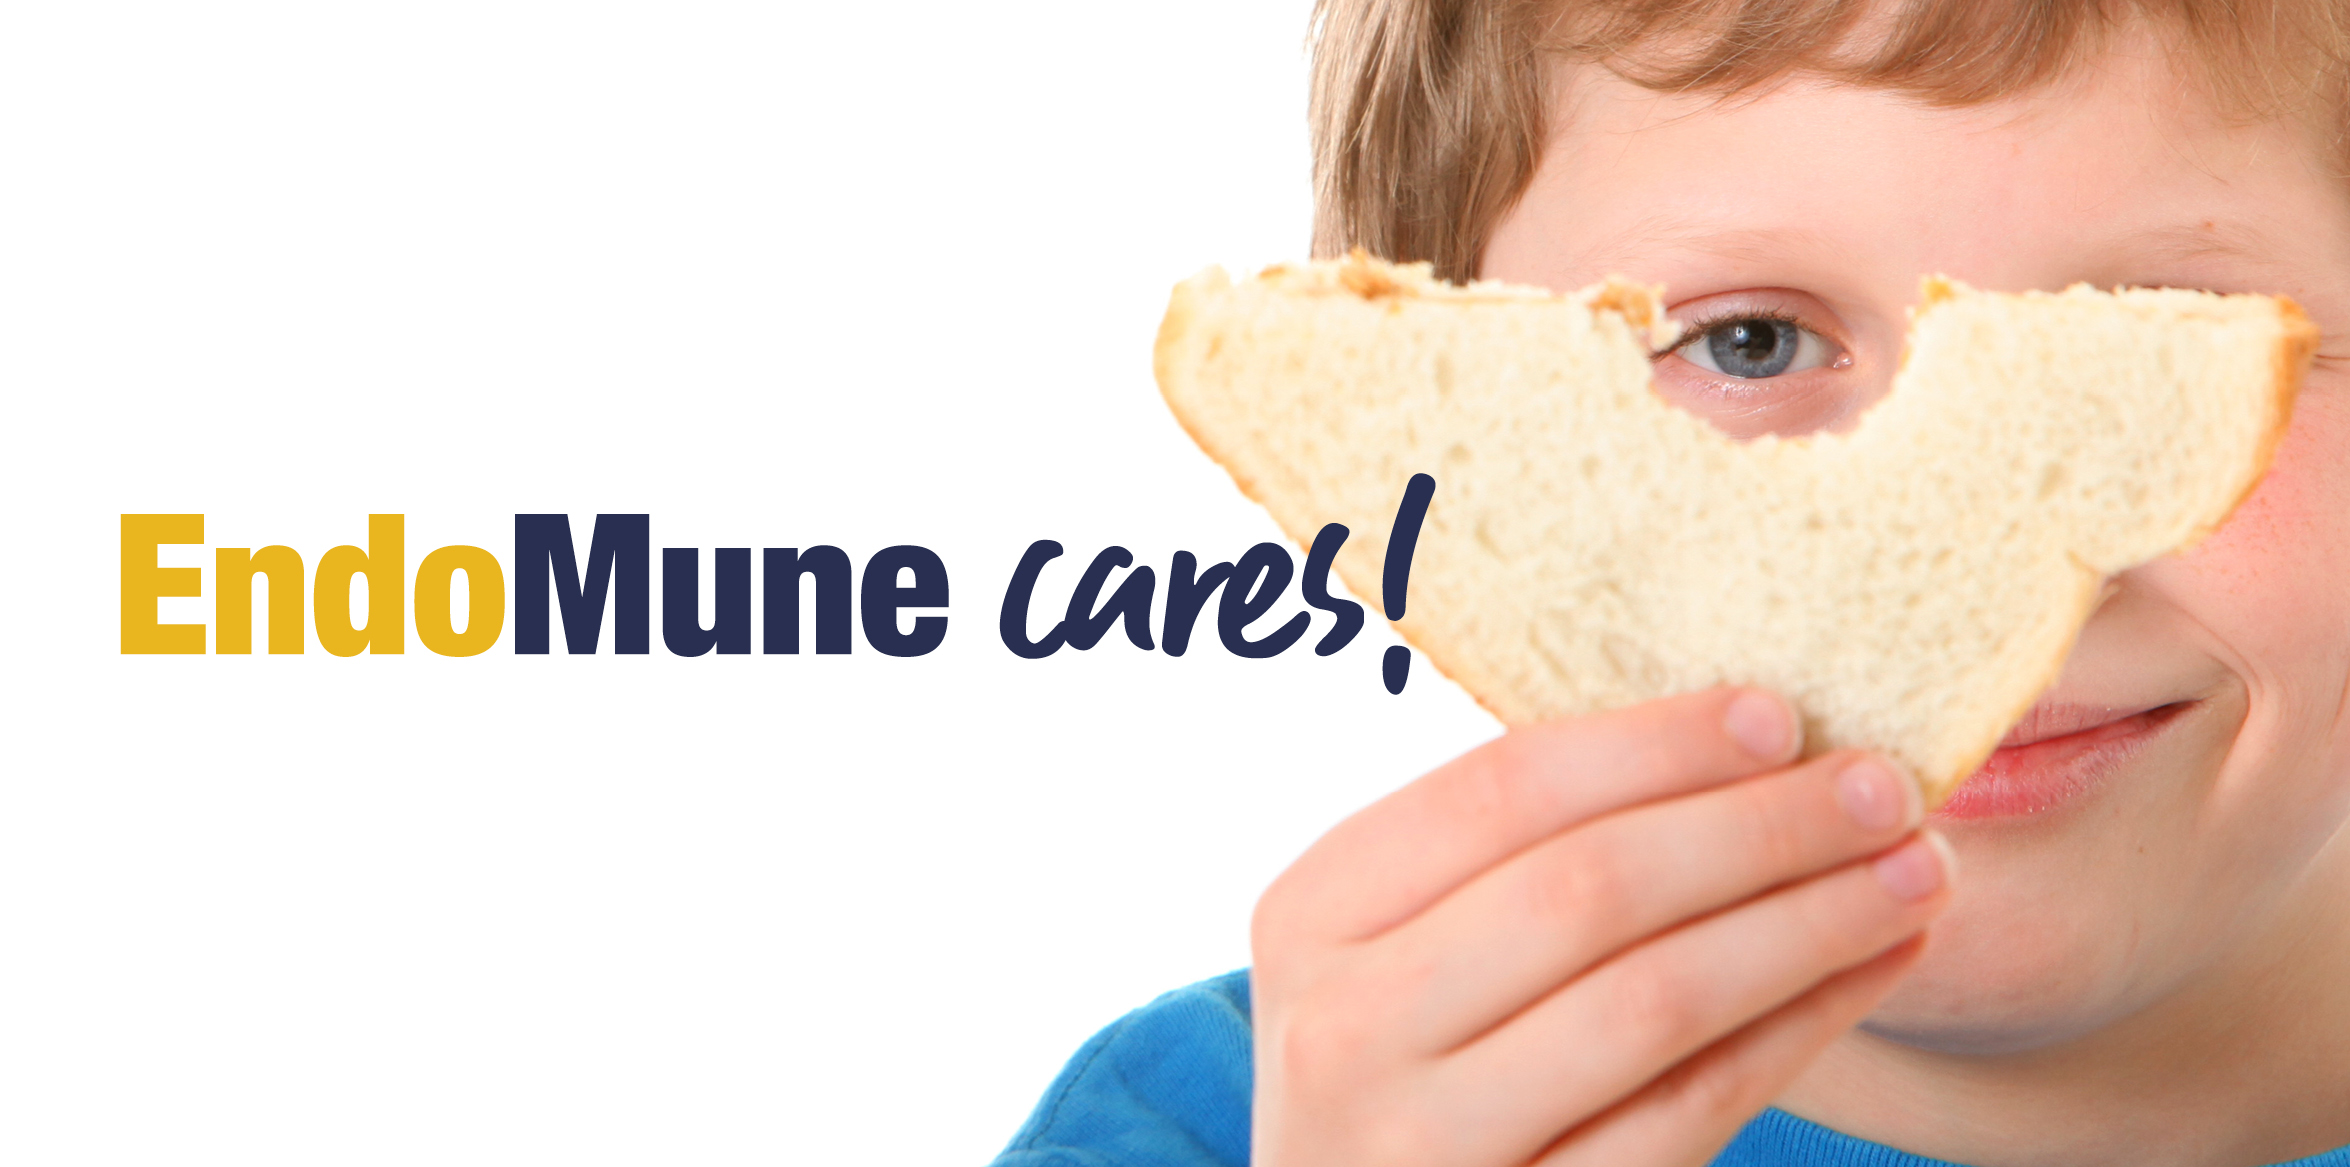 Young boy holding sandwich in front of his face. Caption is "EndoMune Cares!"